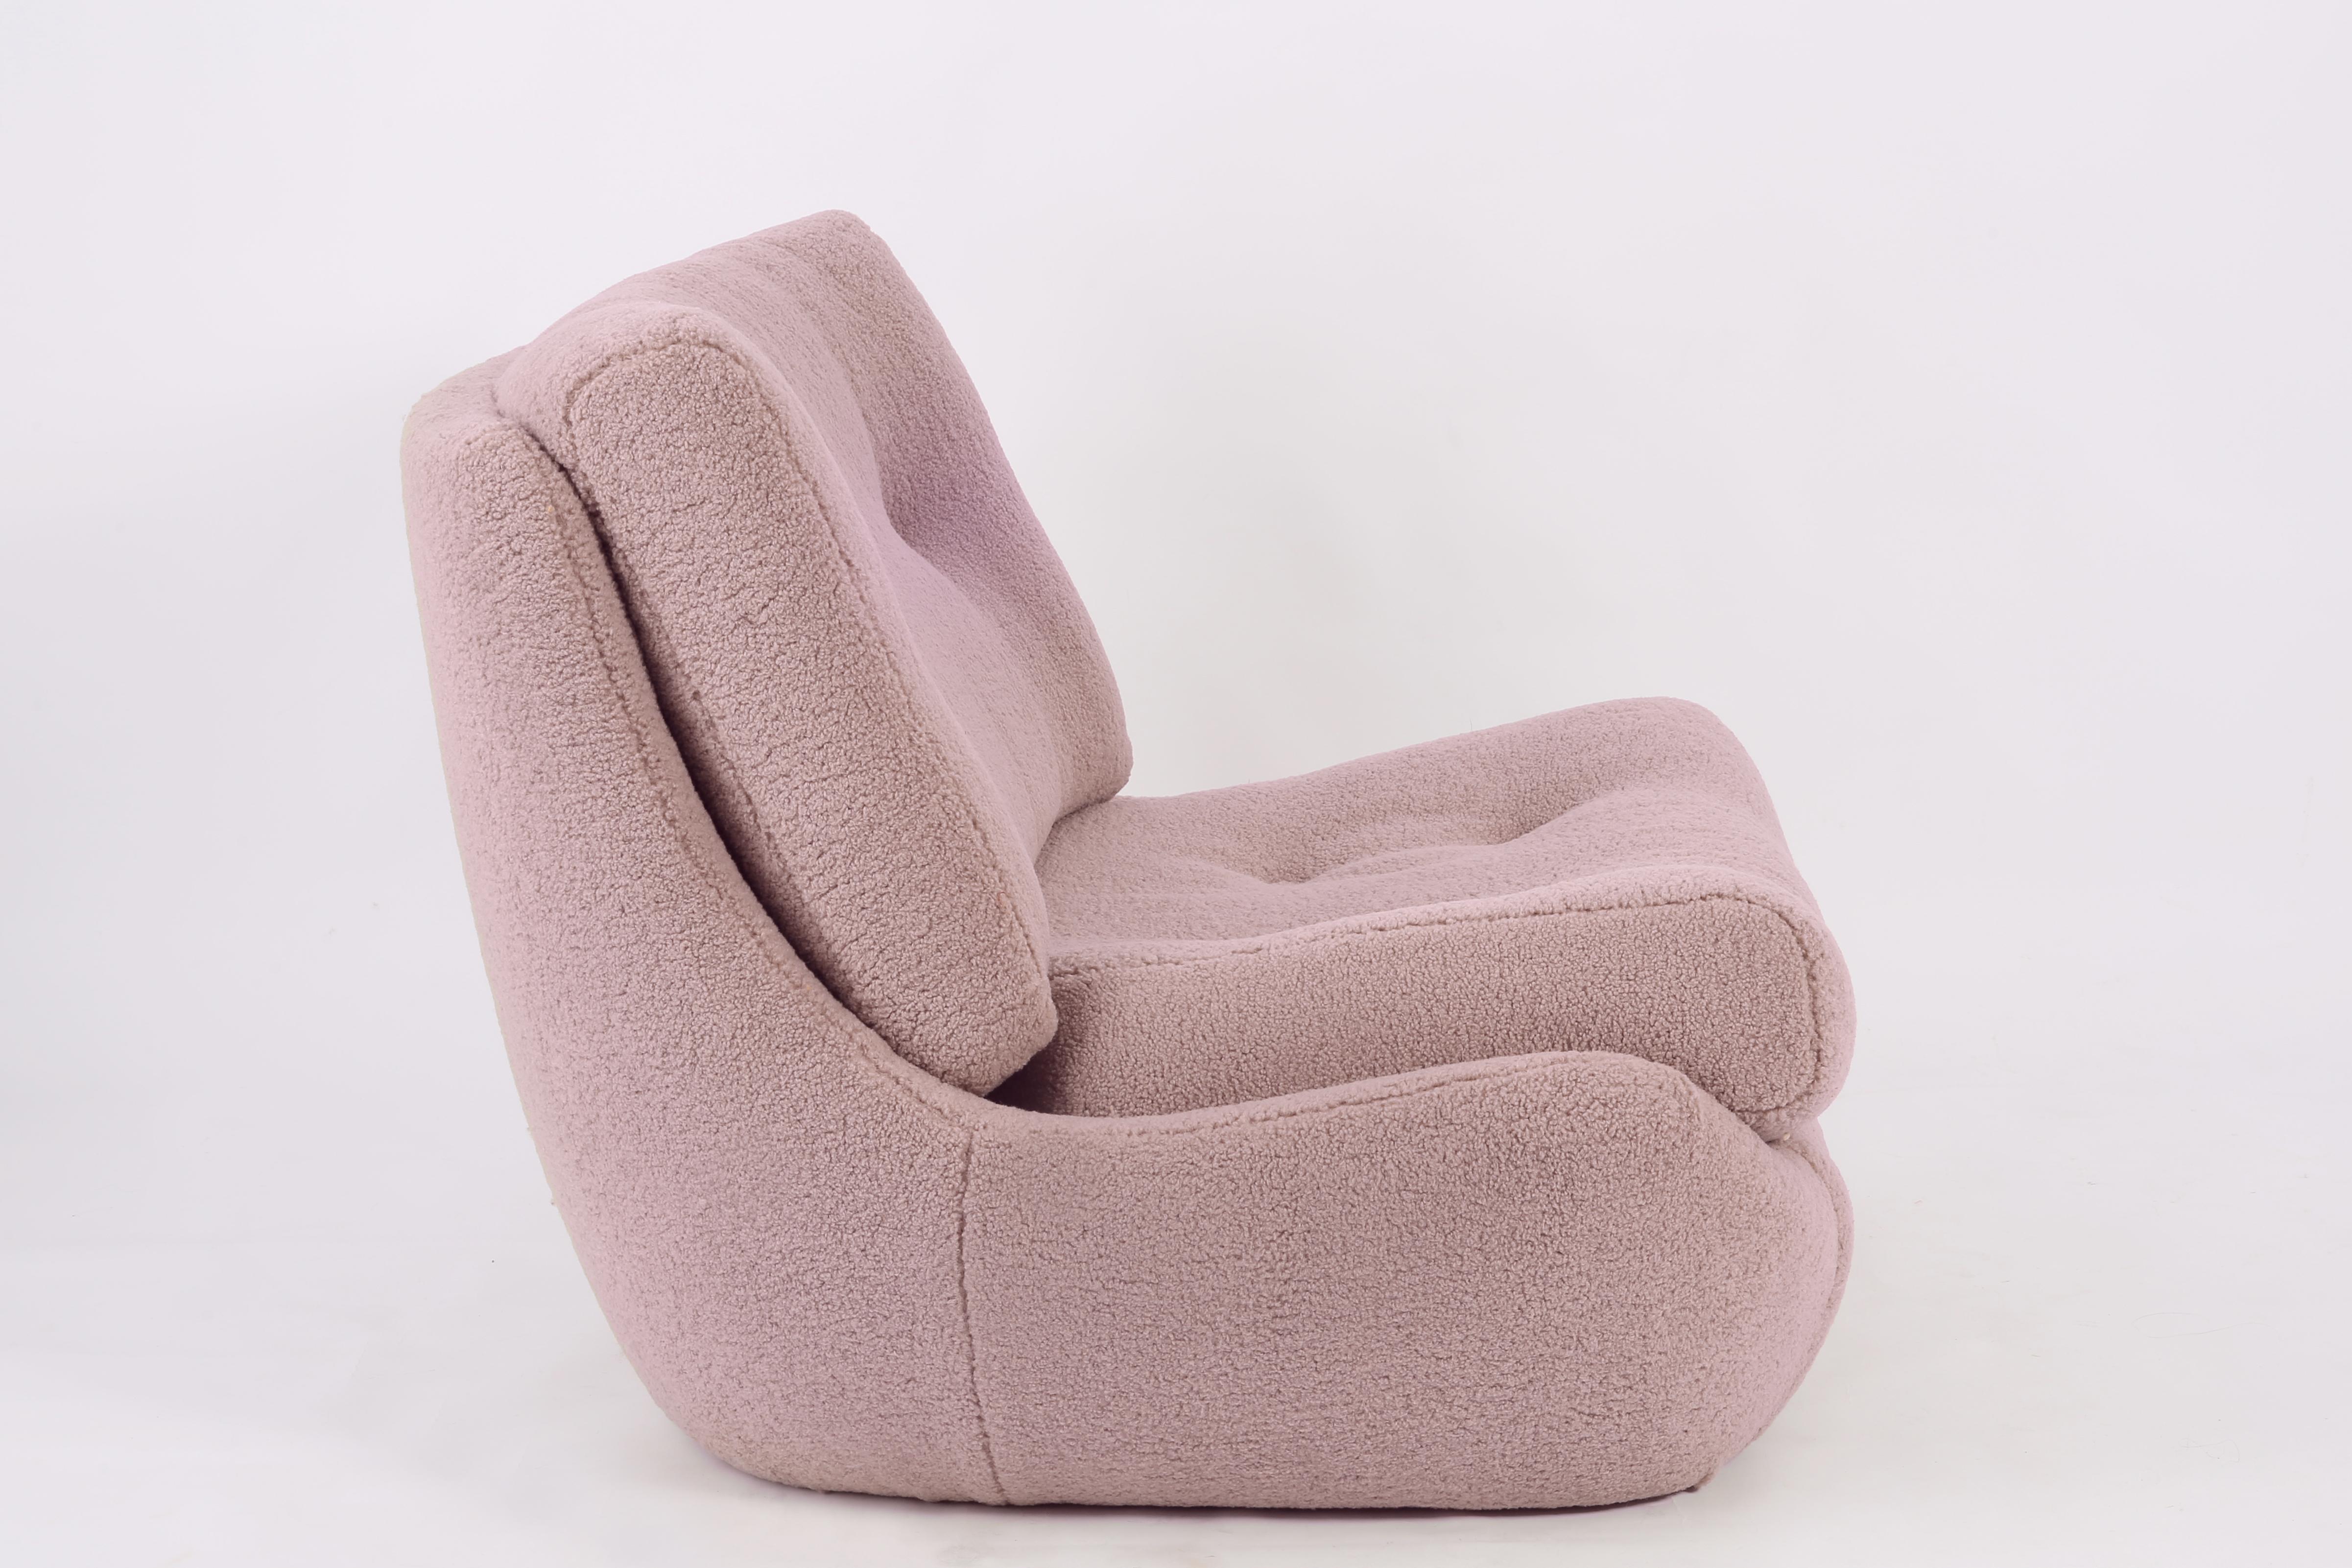 Atlantis armchair from the 1960s, produced in the Silesian furniture factory in Swiebodzin at the moment they are unique. Due to their dimensions, they perfectly blend in even in small apartments providing comfort and beautiful decoration. Covered